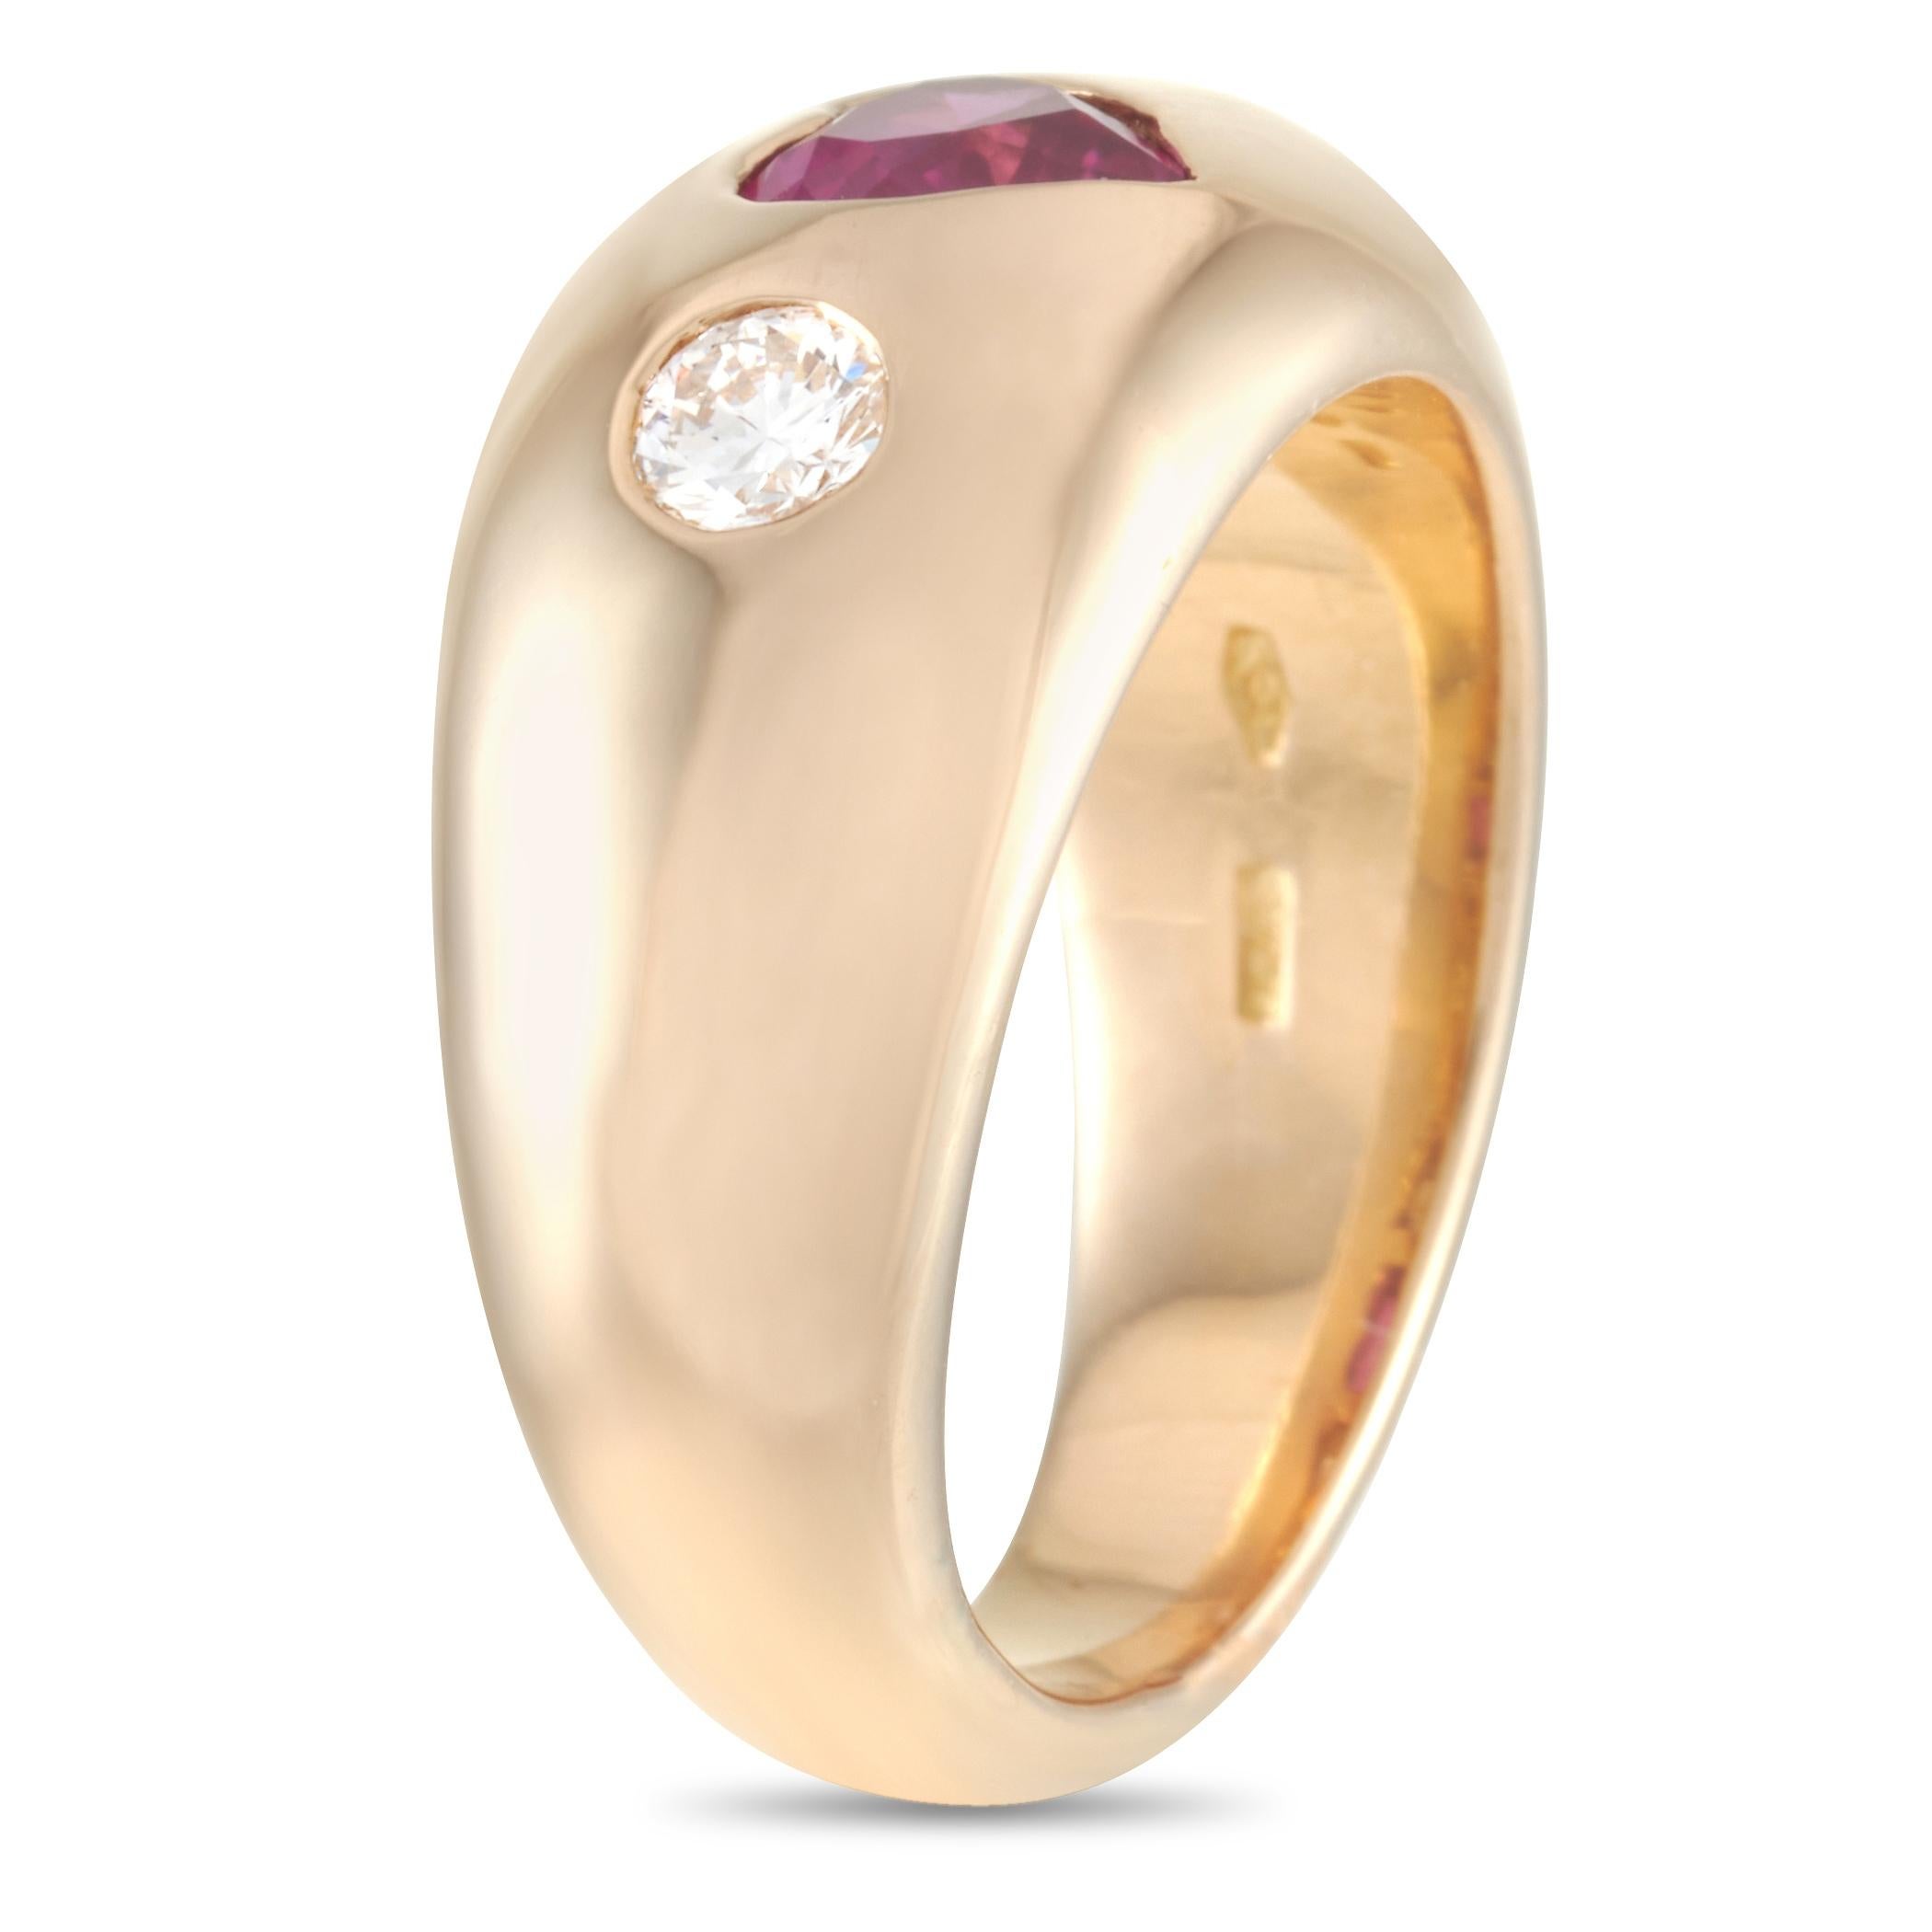 This Bvlgari ring is crafted from 18K yellow gold and set with a heart-shaped 0.85 ct ruby and with diamonds that total 0.25 carats. The ring weighs 12.1 grams. It boasts band thickness of 4 mm and top height of 3 mm, while top dimensions measure 9